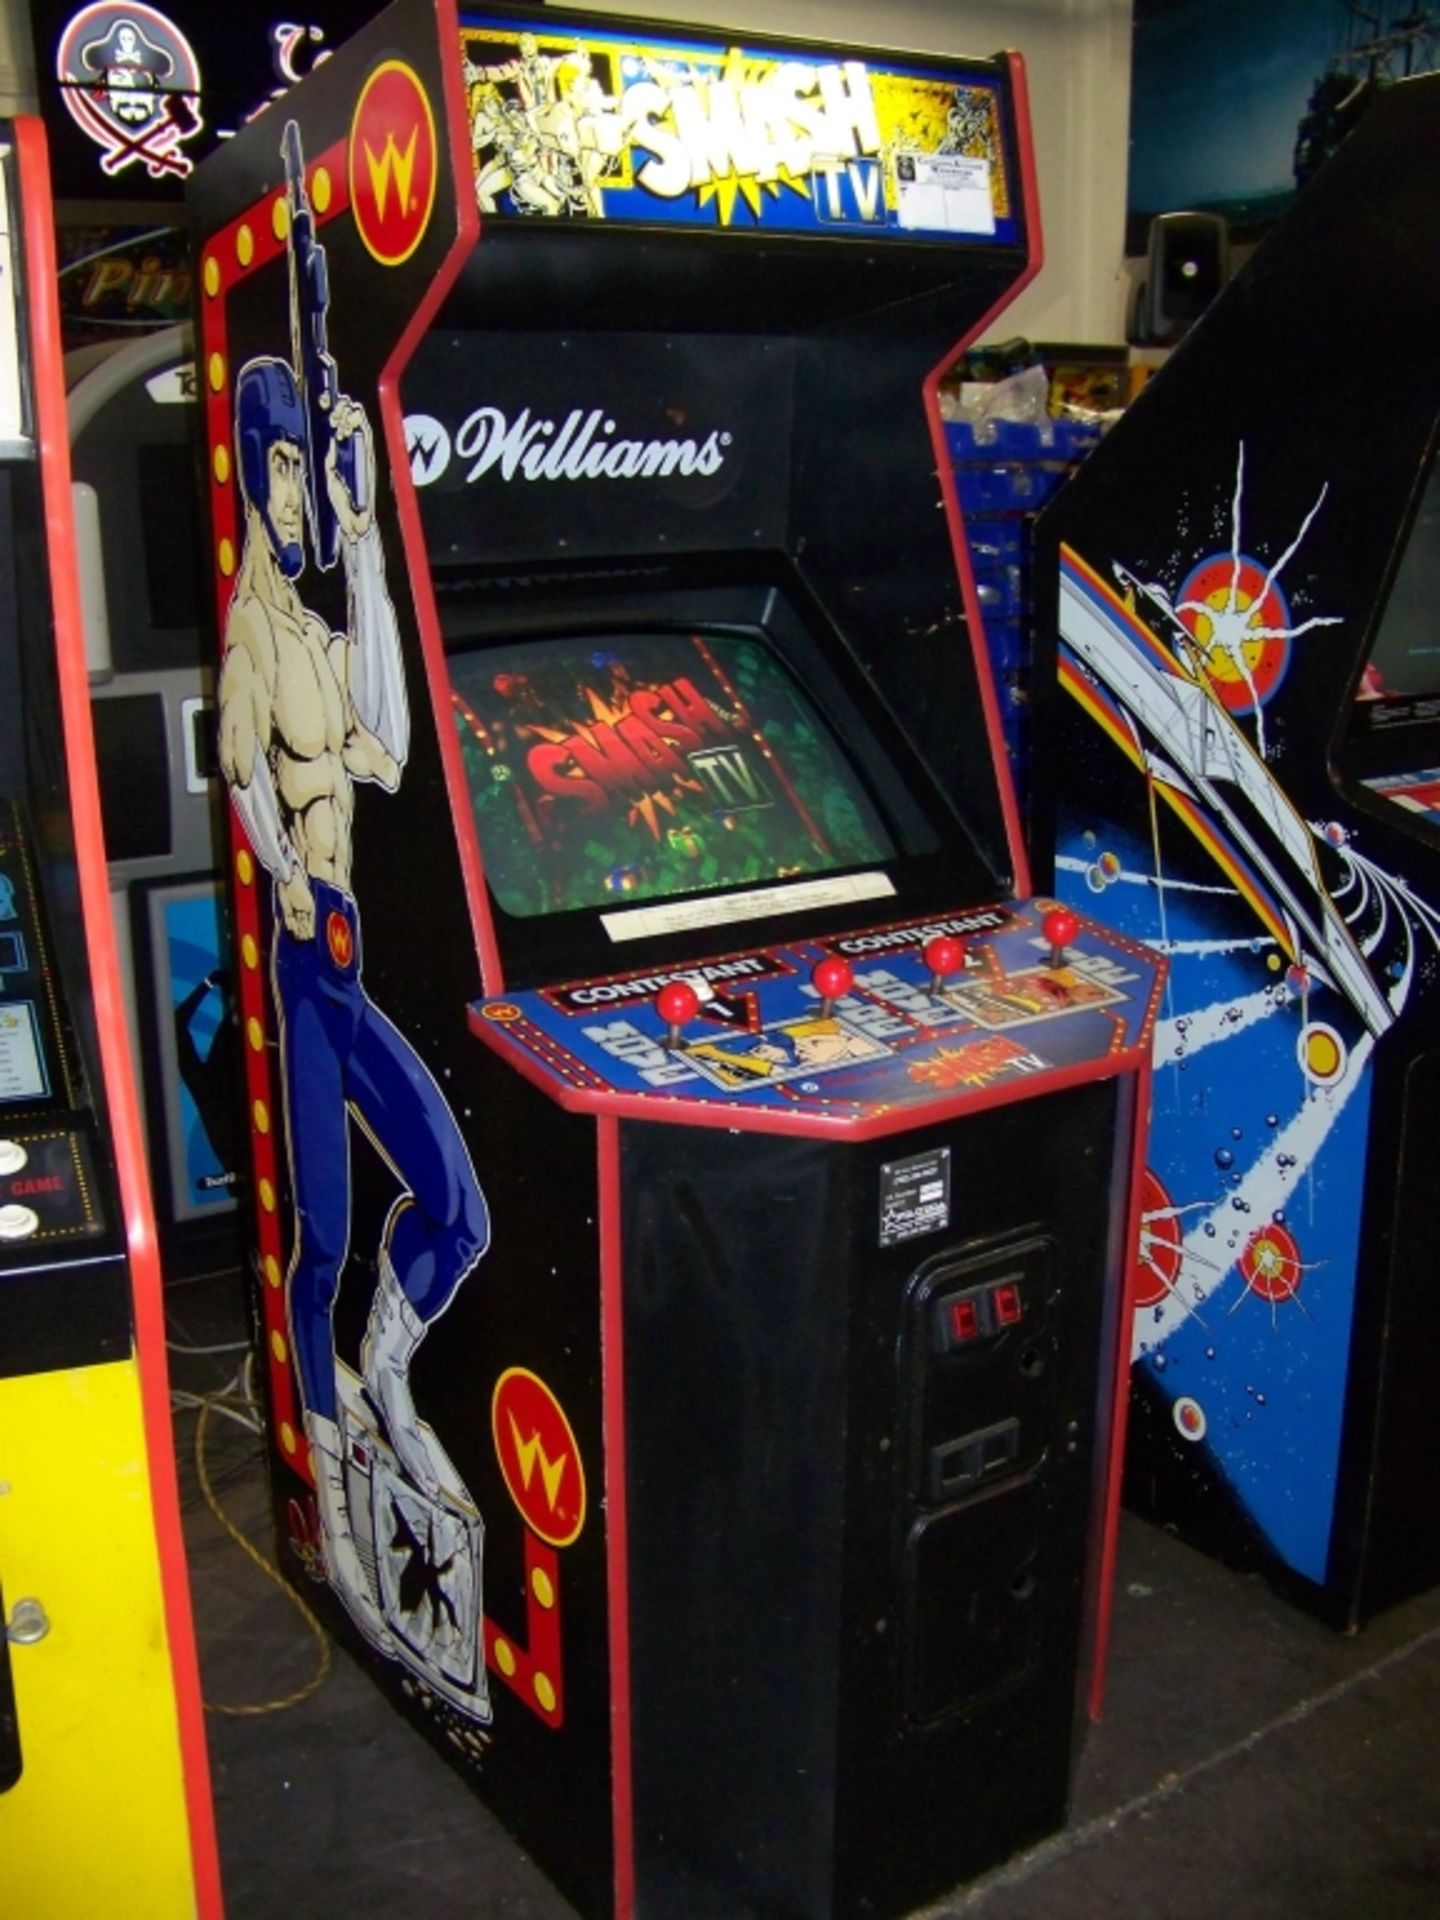 SMASH TV CLASSIC ARCADE GAME WILLIAMS Item is in used condition. Evidence of wear and commercial